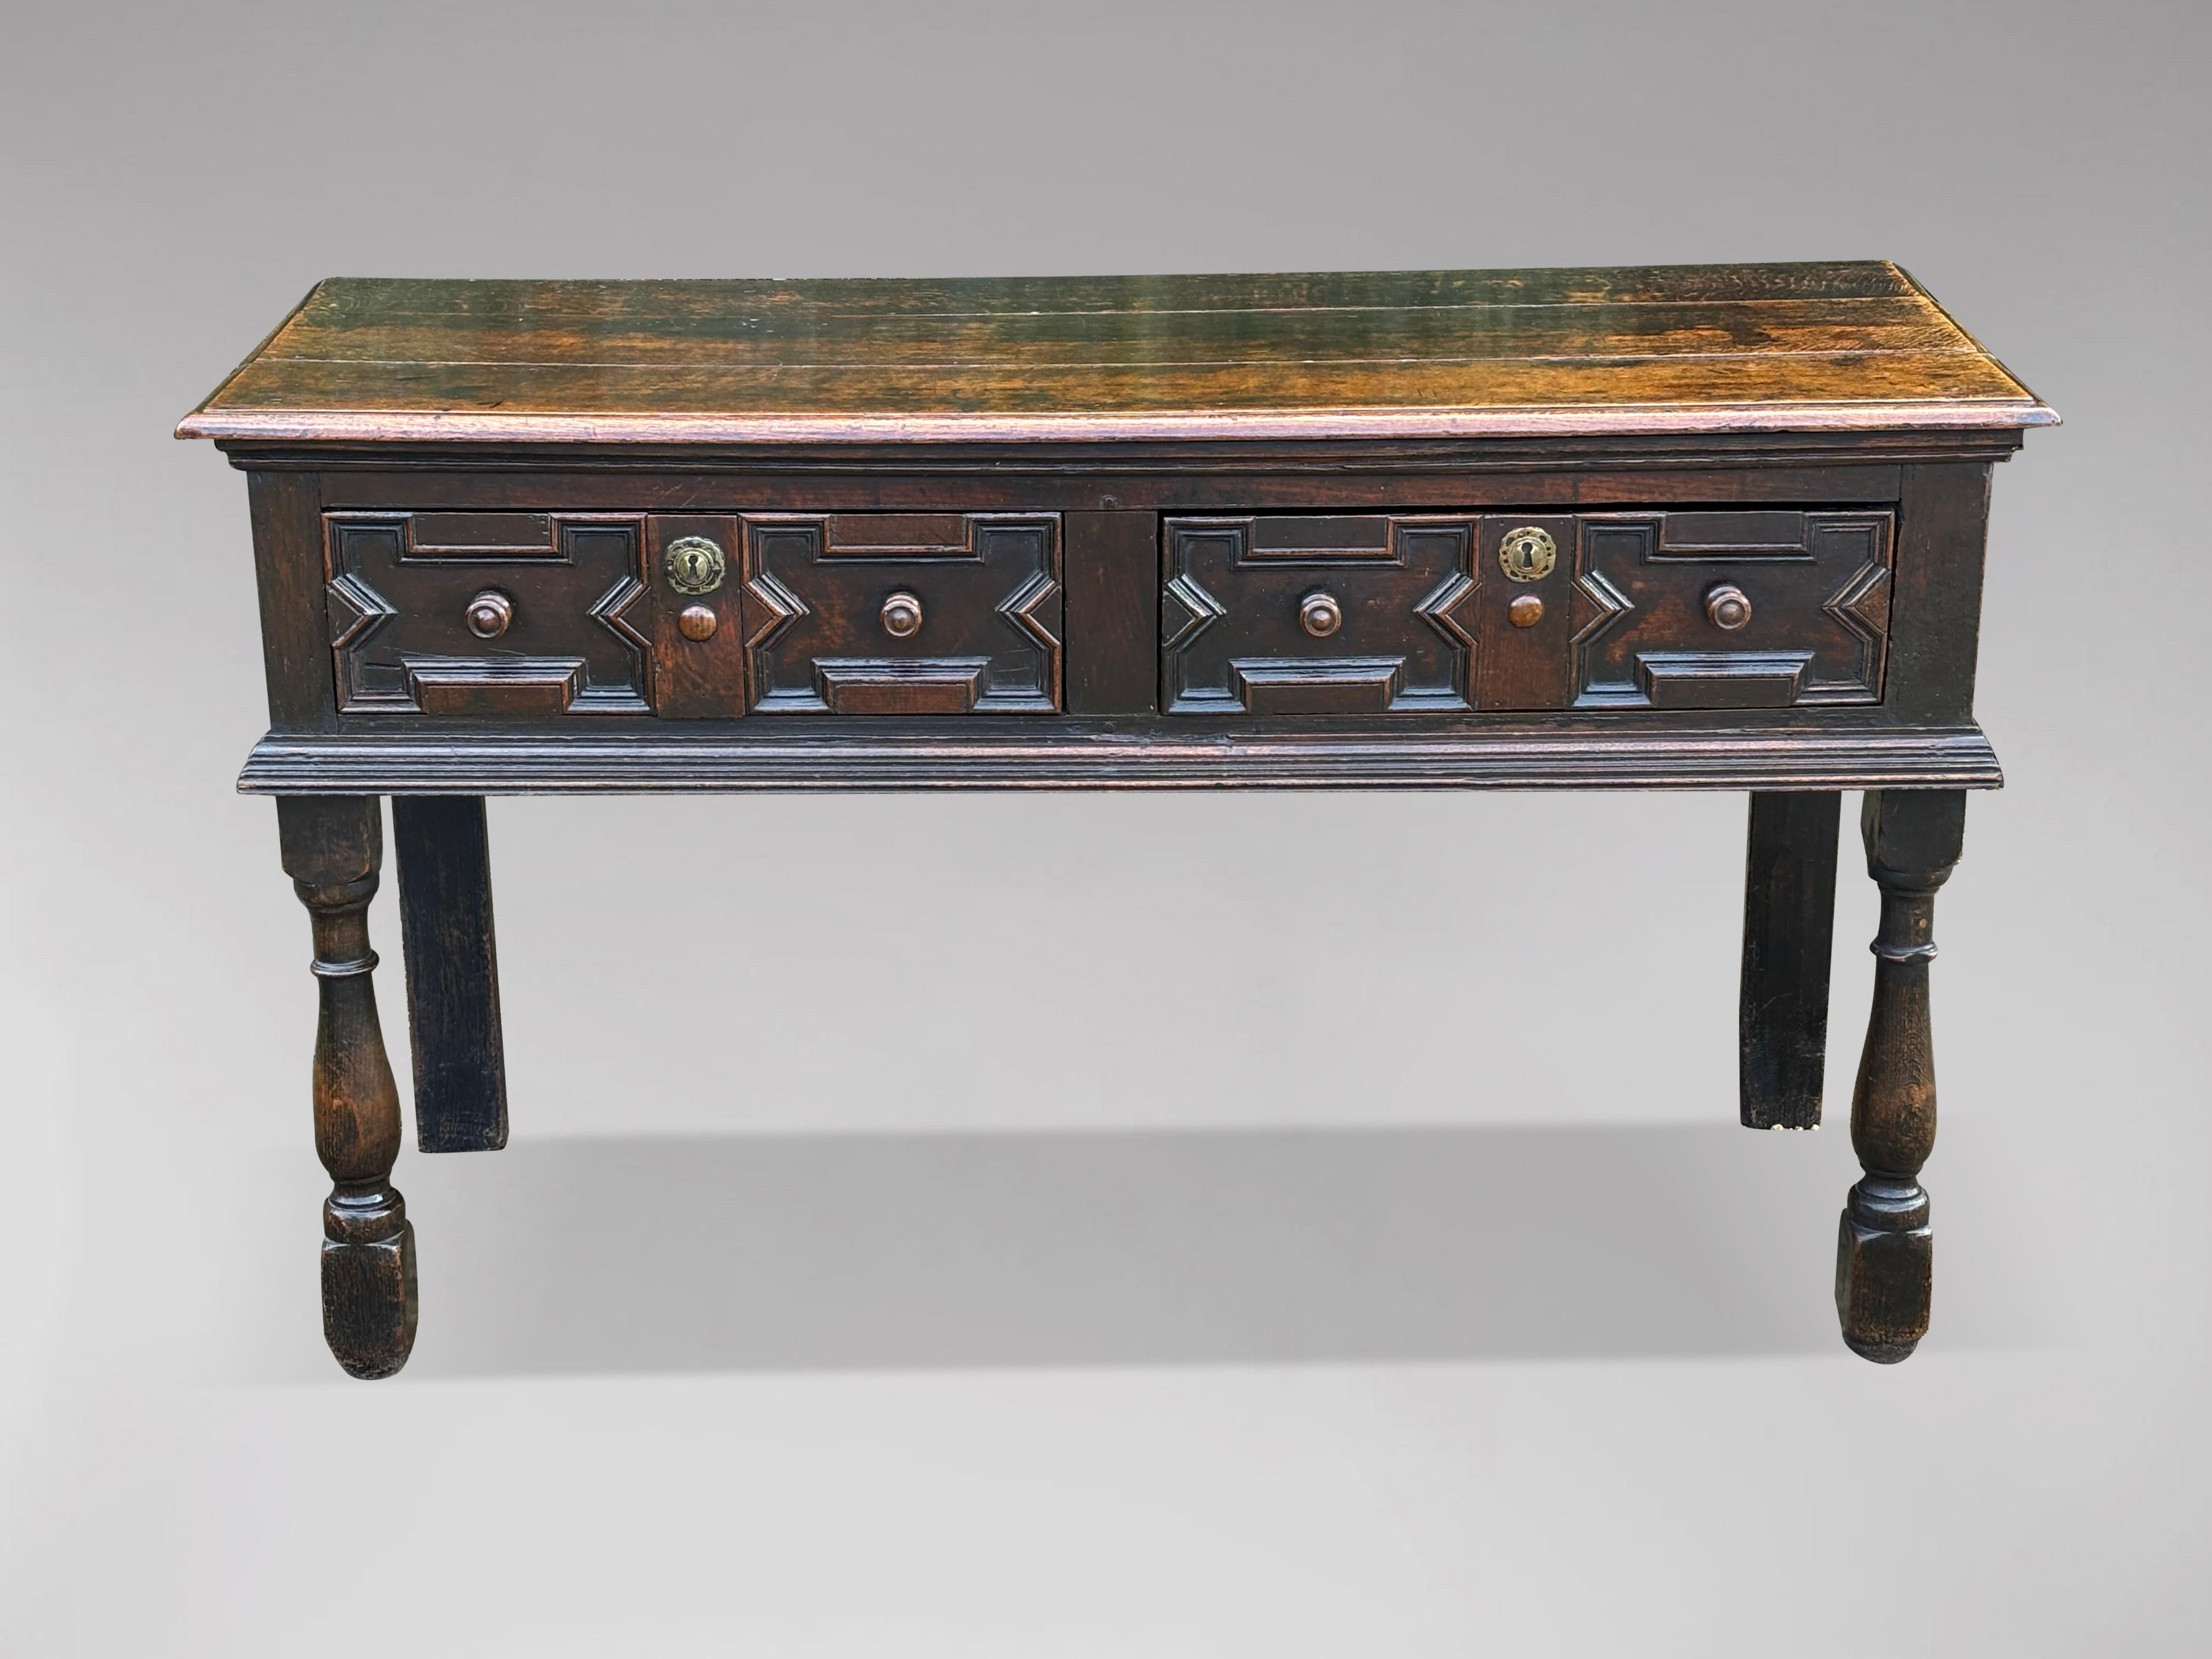 A lovely size, early 18th century oak dresser base with two drawers over geometric moulded detail. A moulded three planked solid oak top and the front of the dresser features geometric applied mouldings to the drawer fronts. The two large working